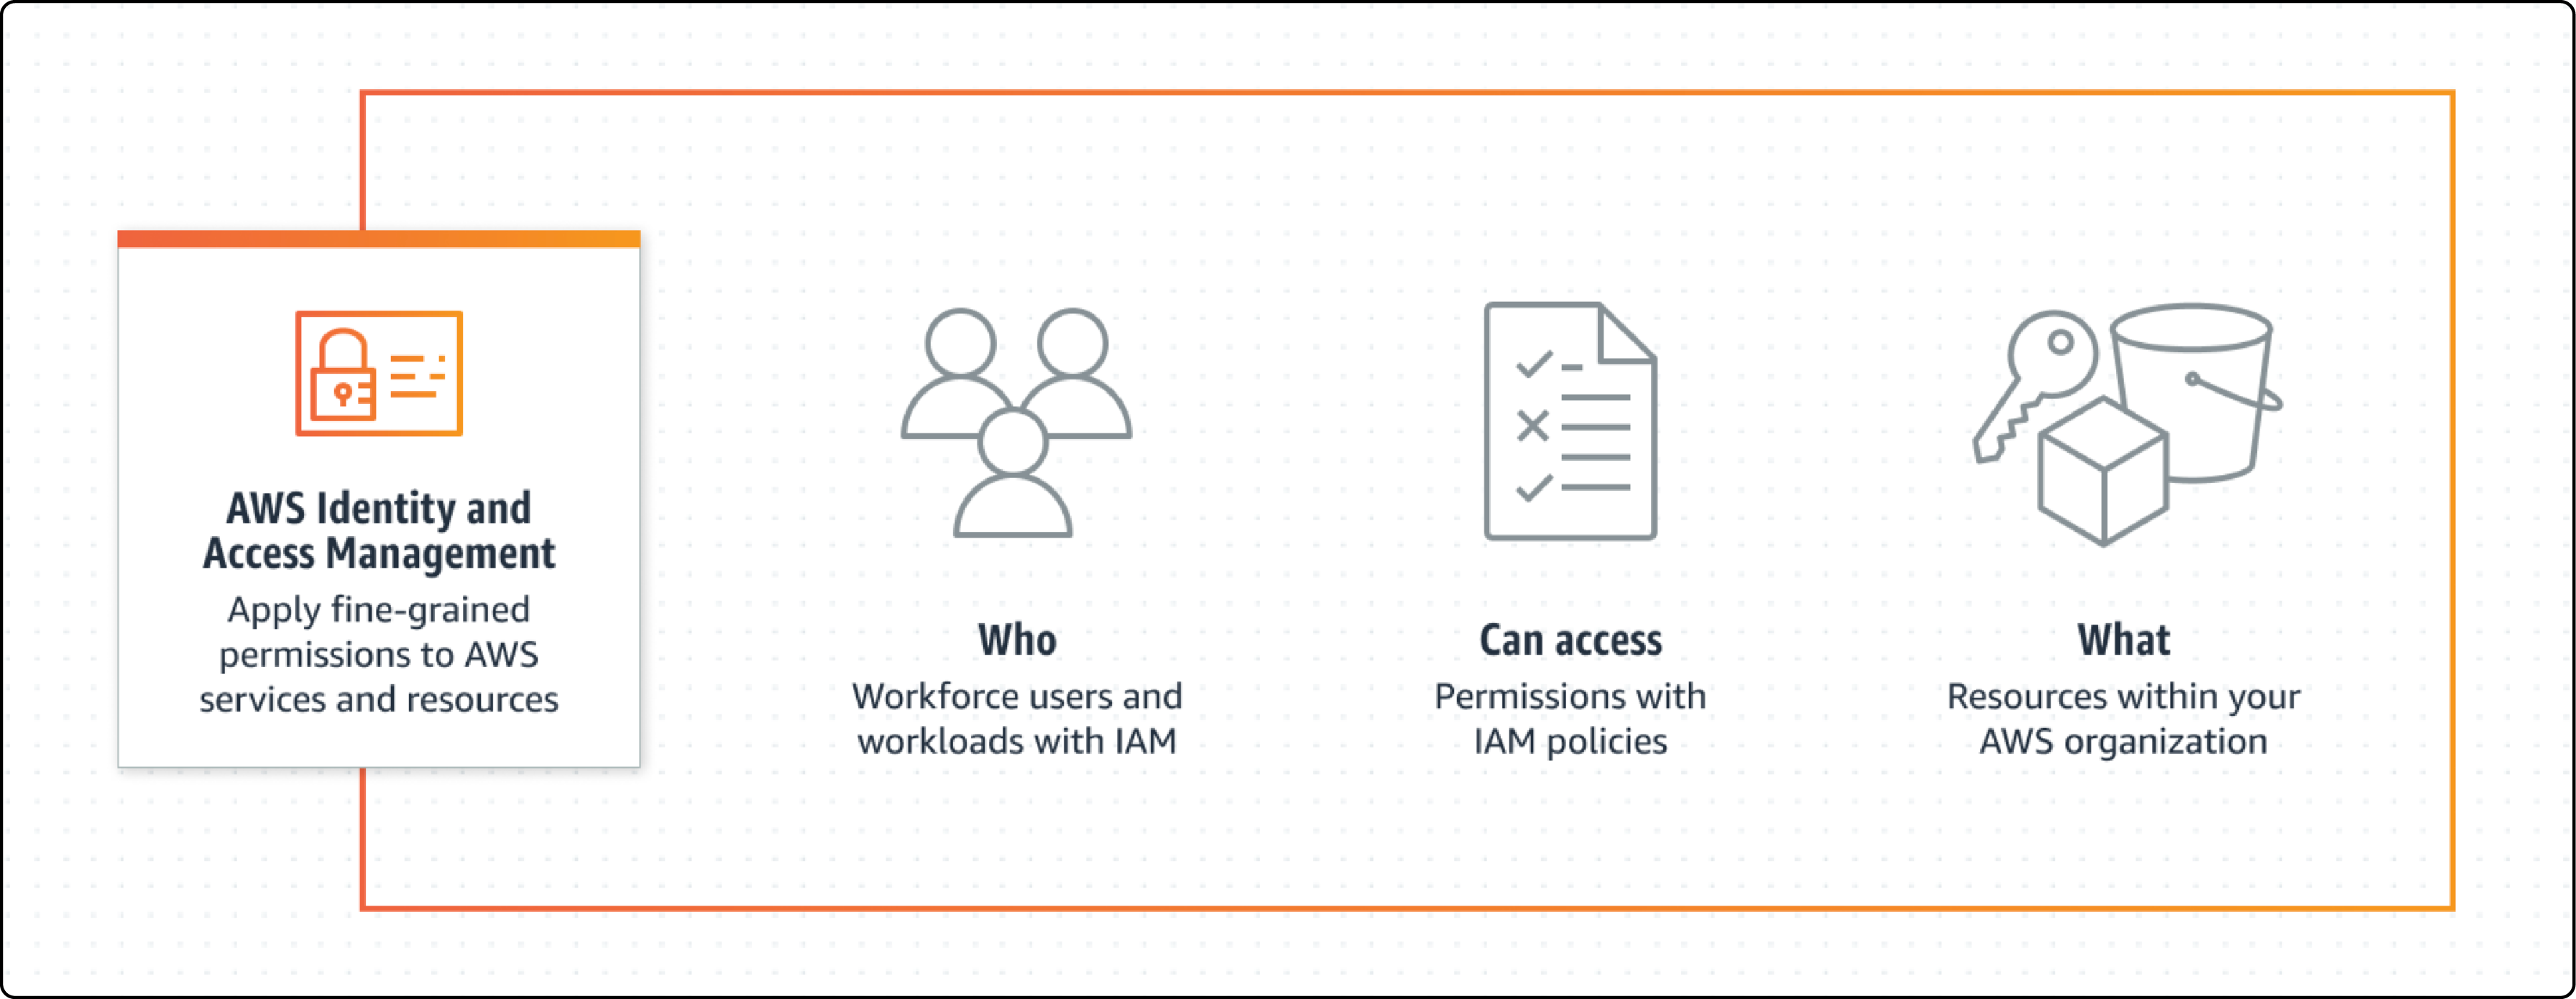 Amazon Web Services Identity and Access Management (IAM) interface for advanced security features